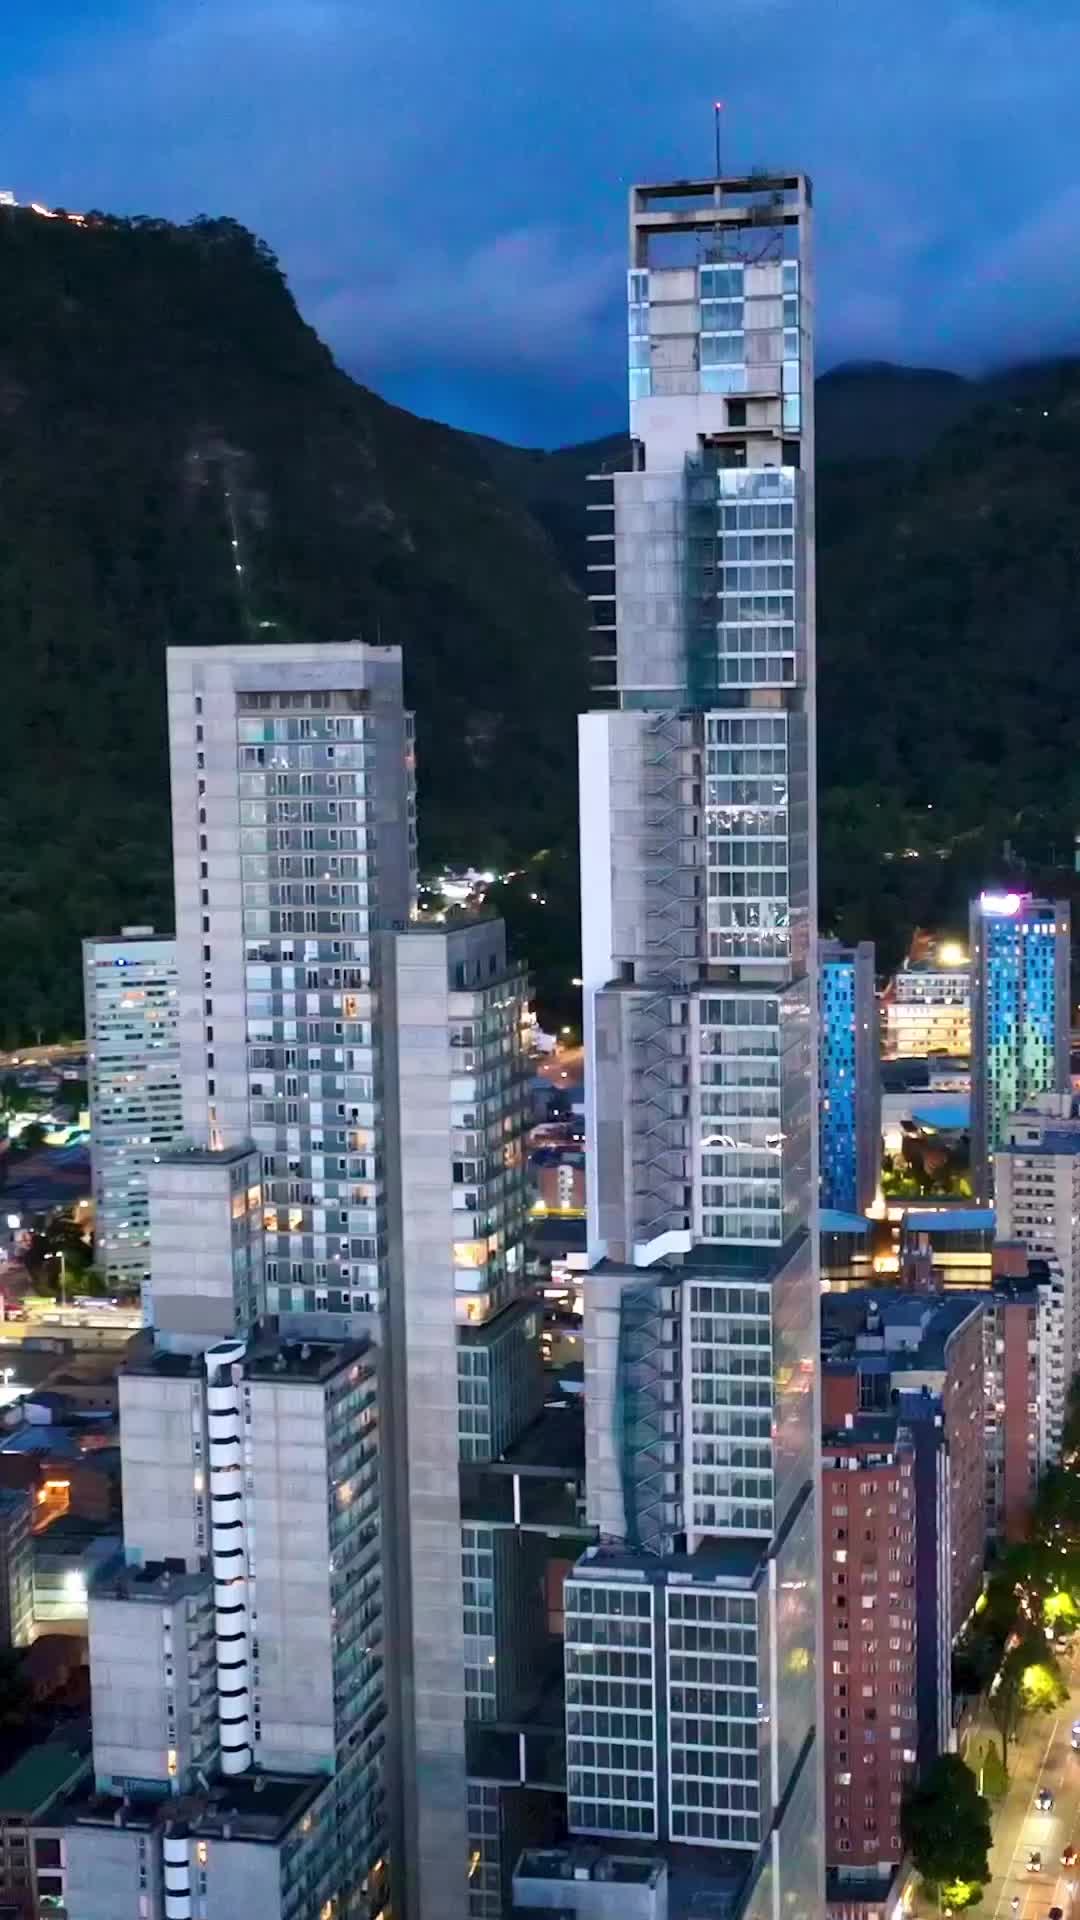 BD Bacatá: Tallest Building in Colombia 🇨🇴